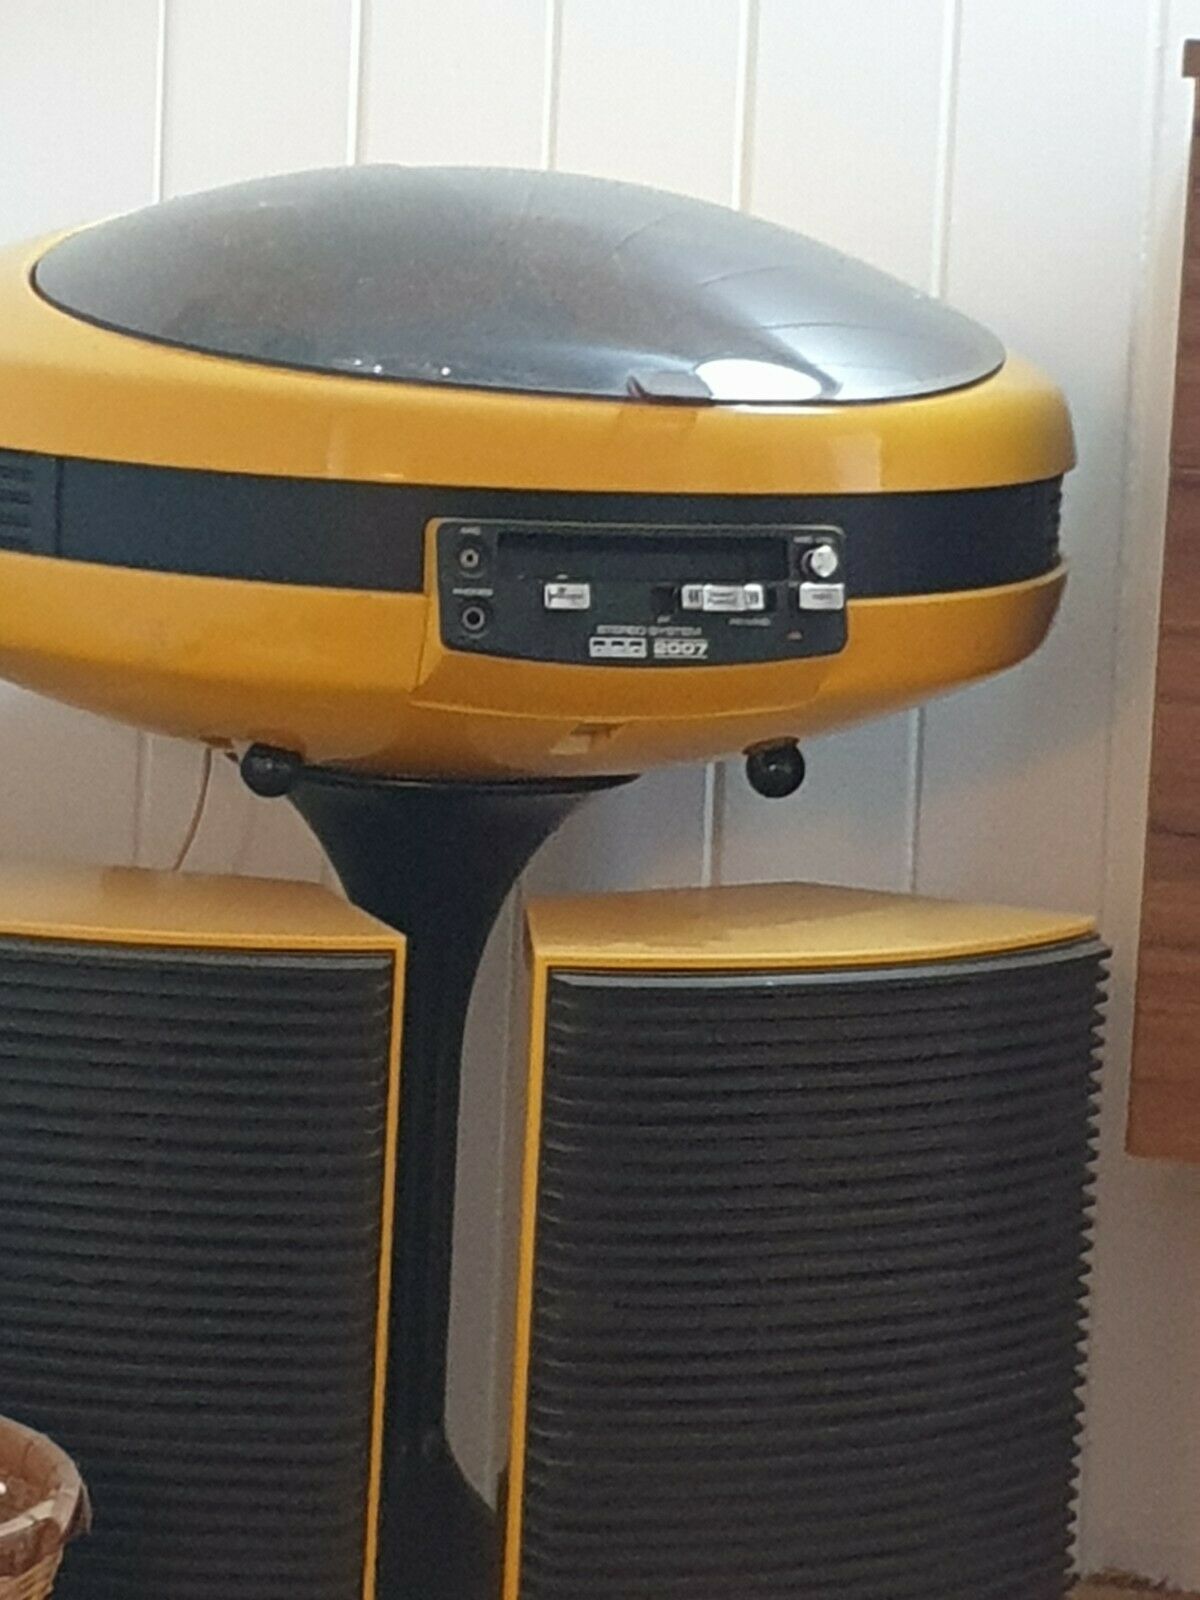 WELTRON YELLOW 2006 2007 SPEAKERS only for sale RETRO VINTAGE